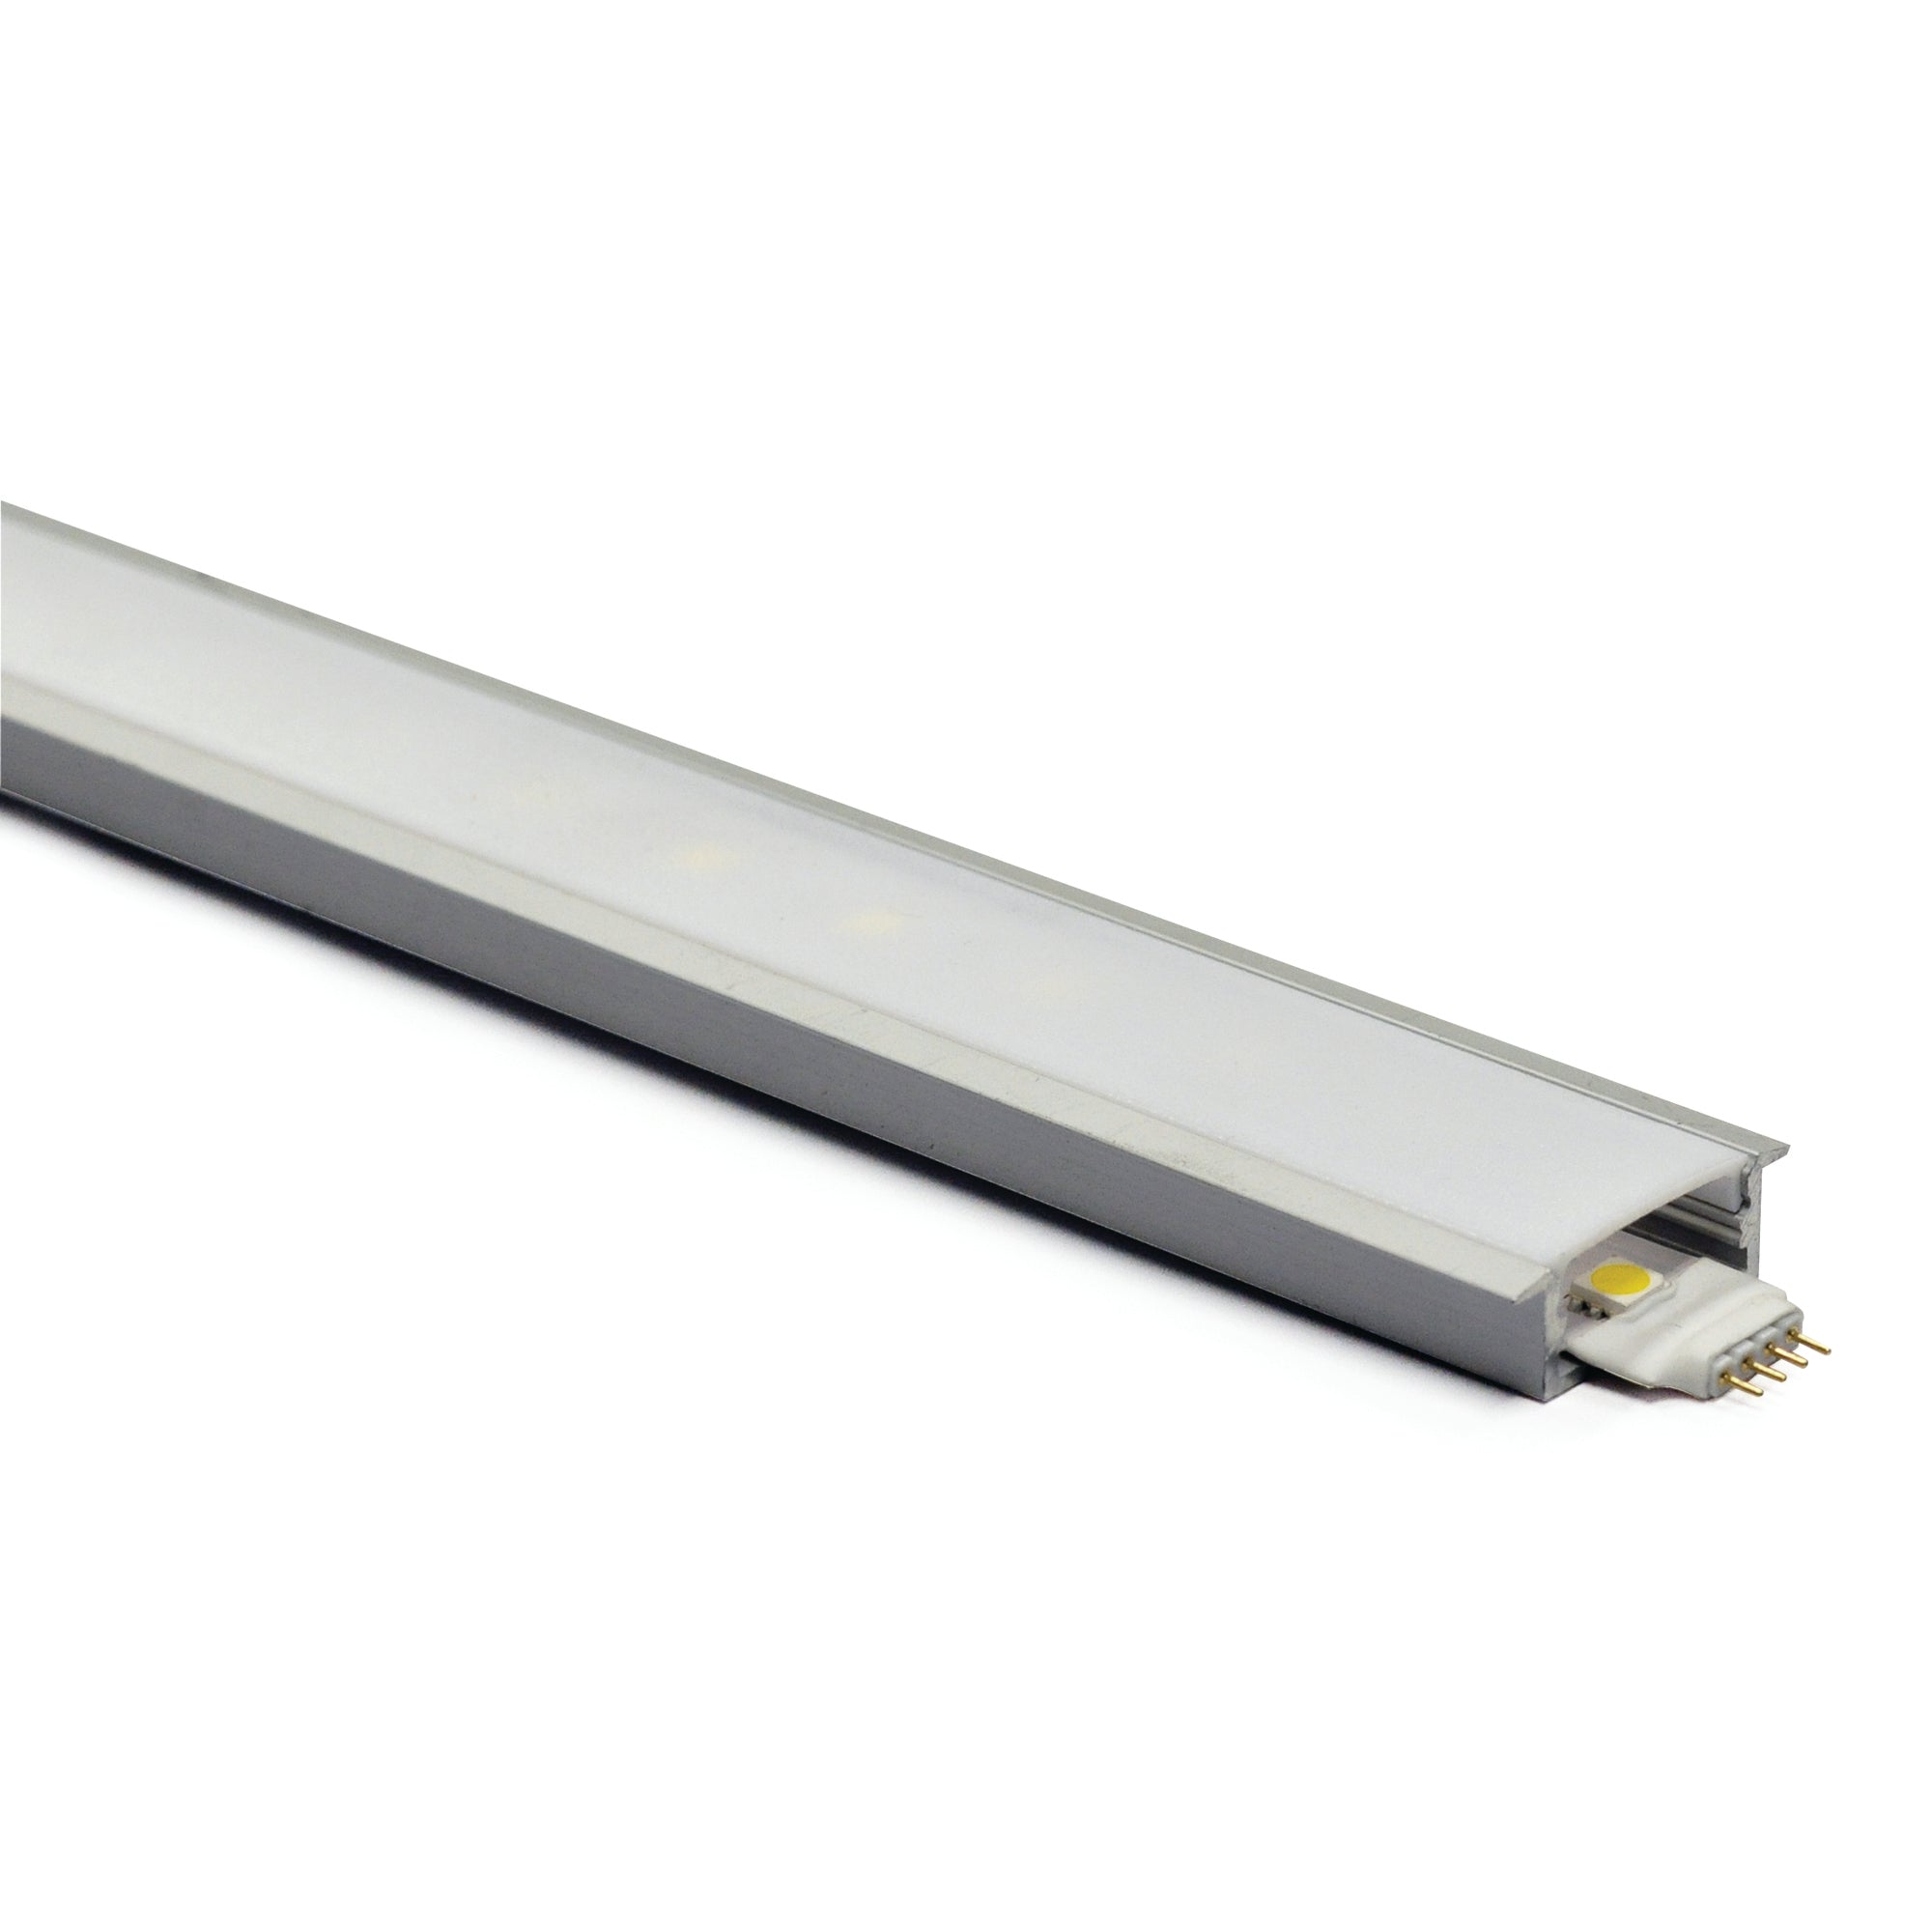 Nora Lighting NATL-C23A 4-ft Shallow Channel With Wings(Plastic Diffuser and End Caps Included) - Aluminum